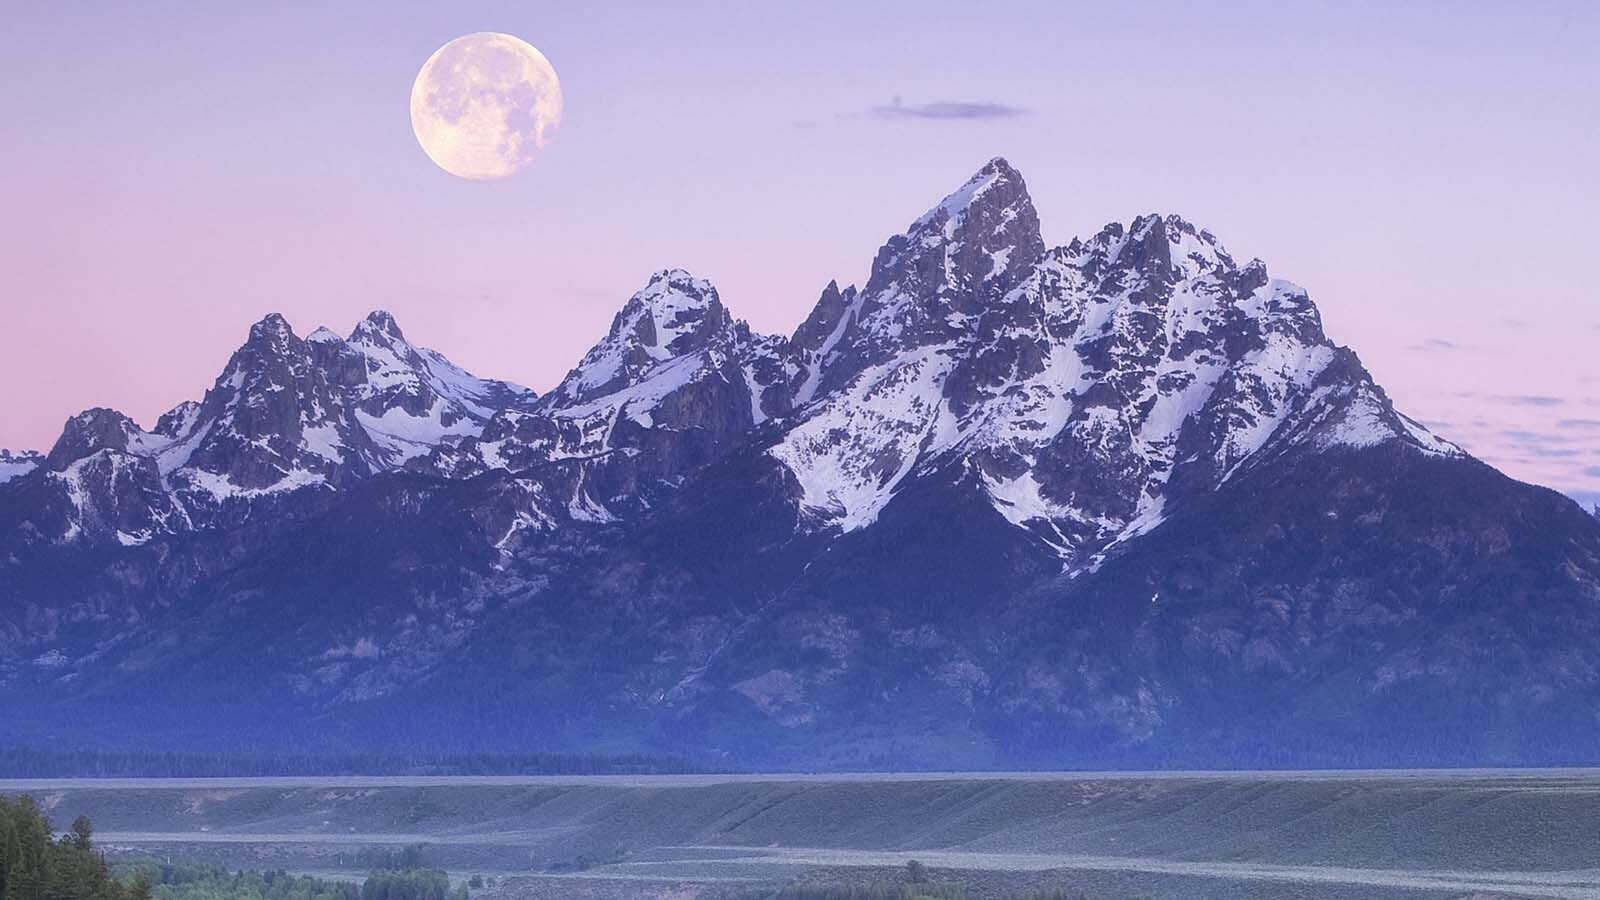 A full moon over the Tetons in Wyoming.